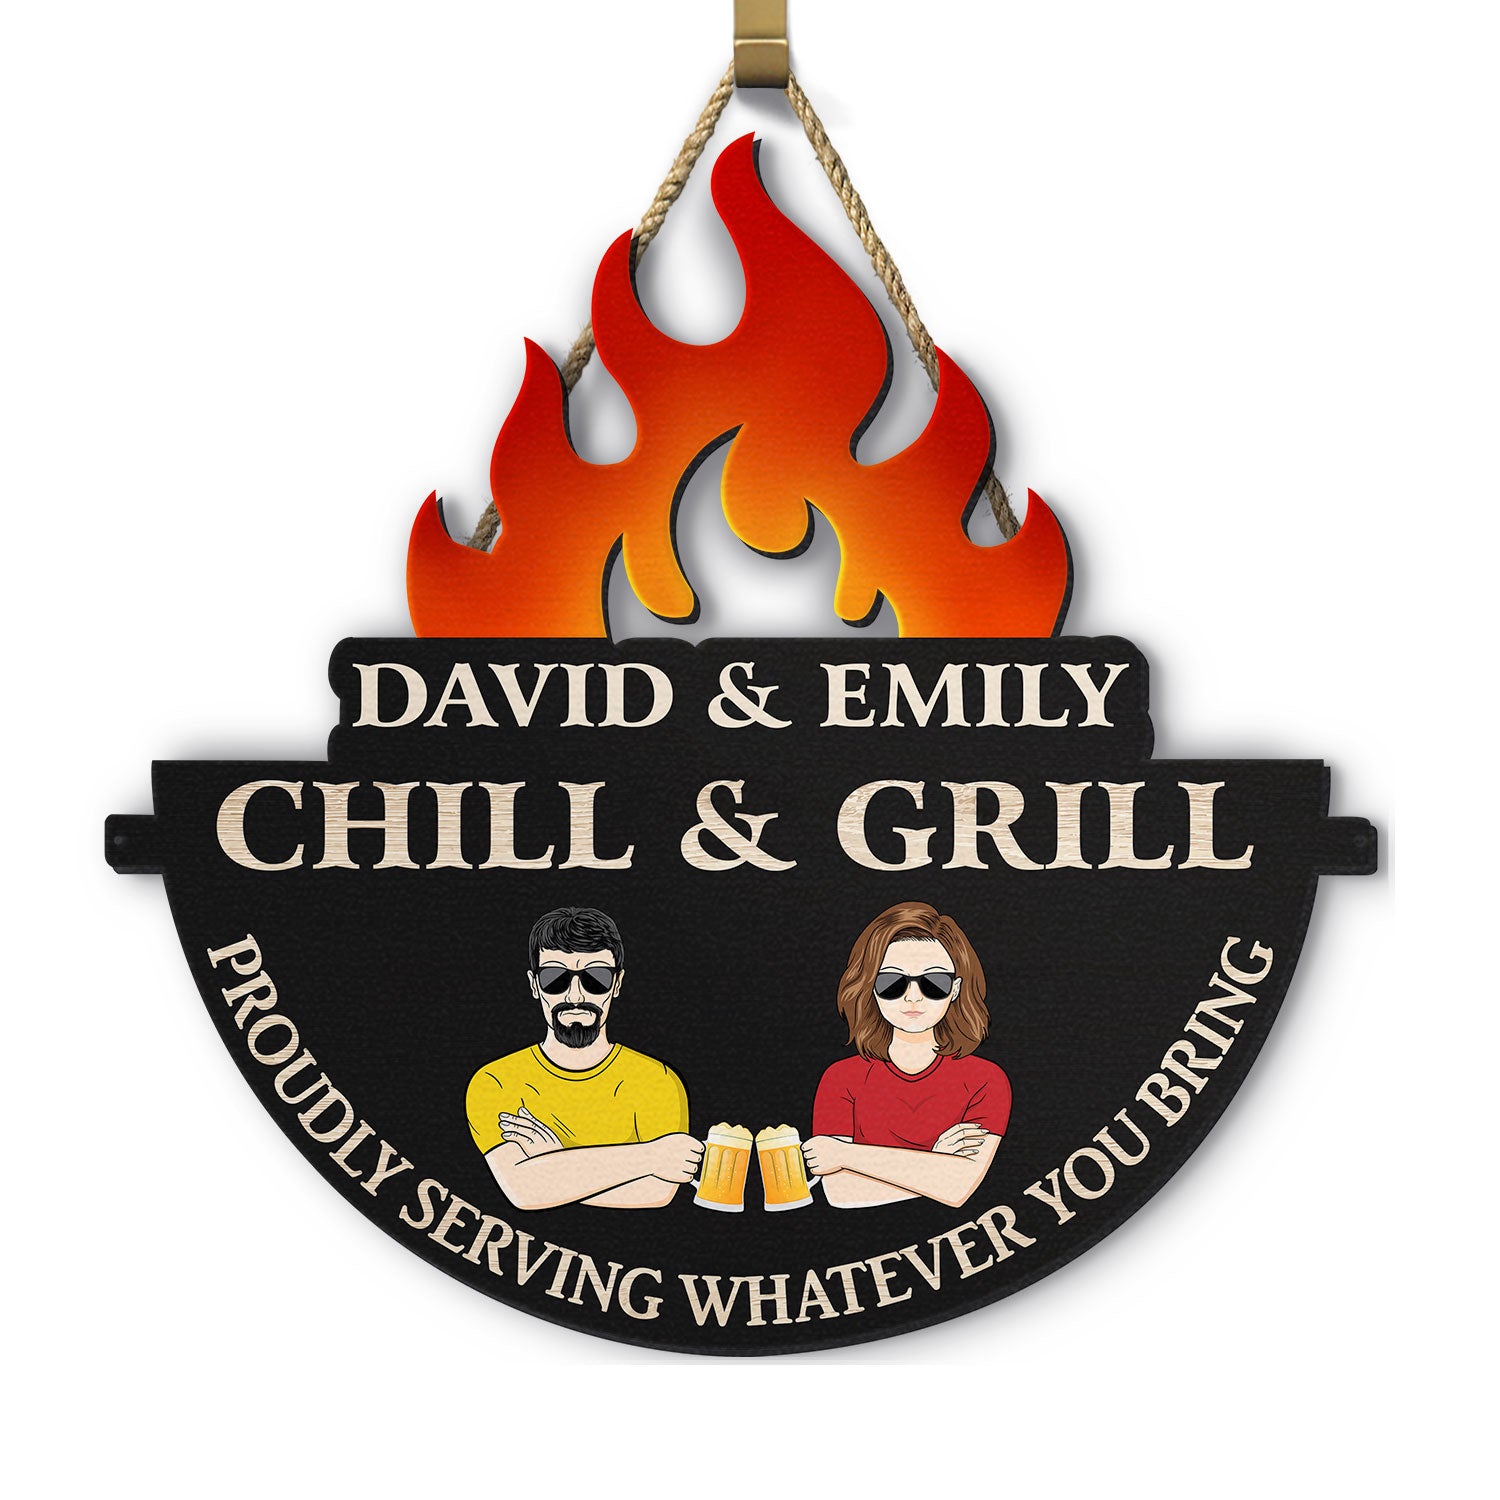 Chill & Grill Proudly Serving What Ever You Bring - Outdoor Decor, Backyard Sign, Gift For Couples - Personalized Custom Shaped Wood Sign